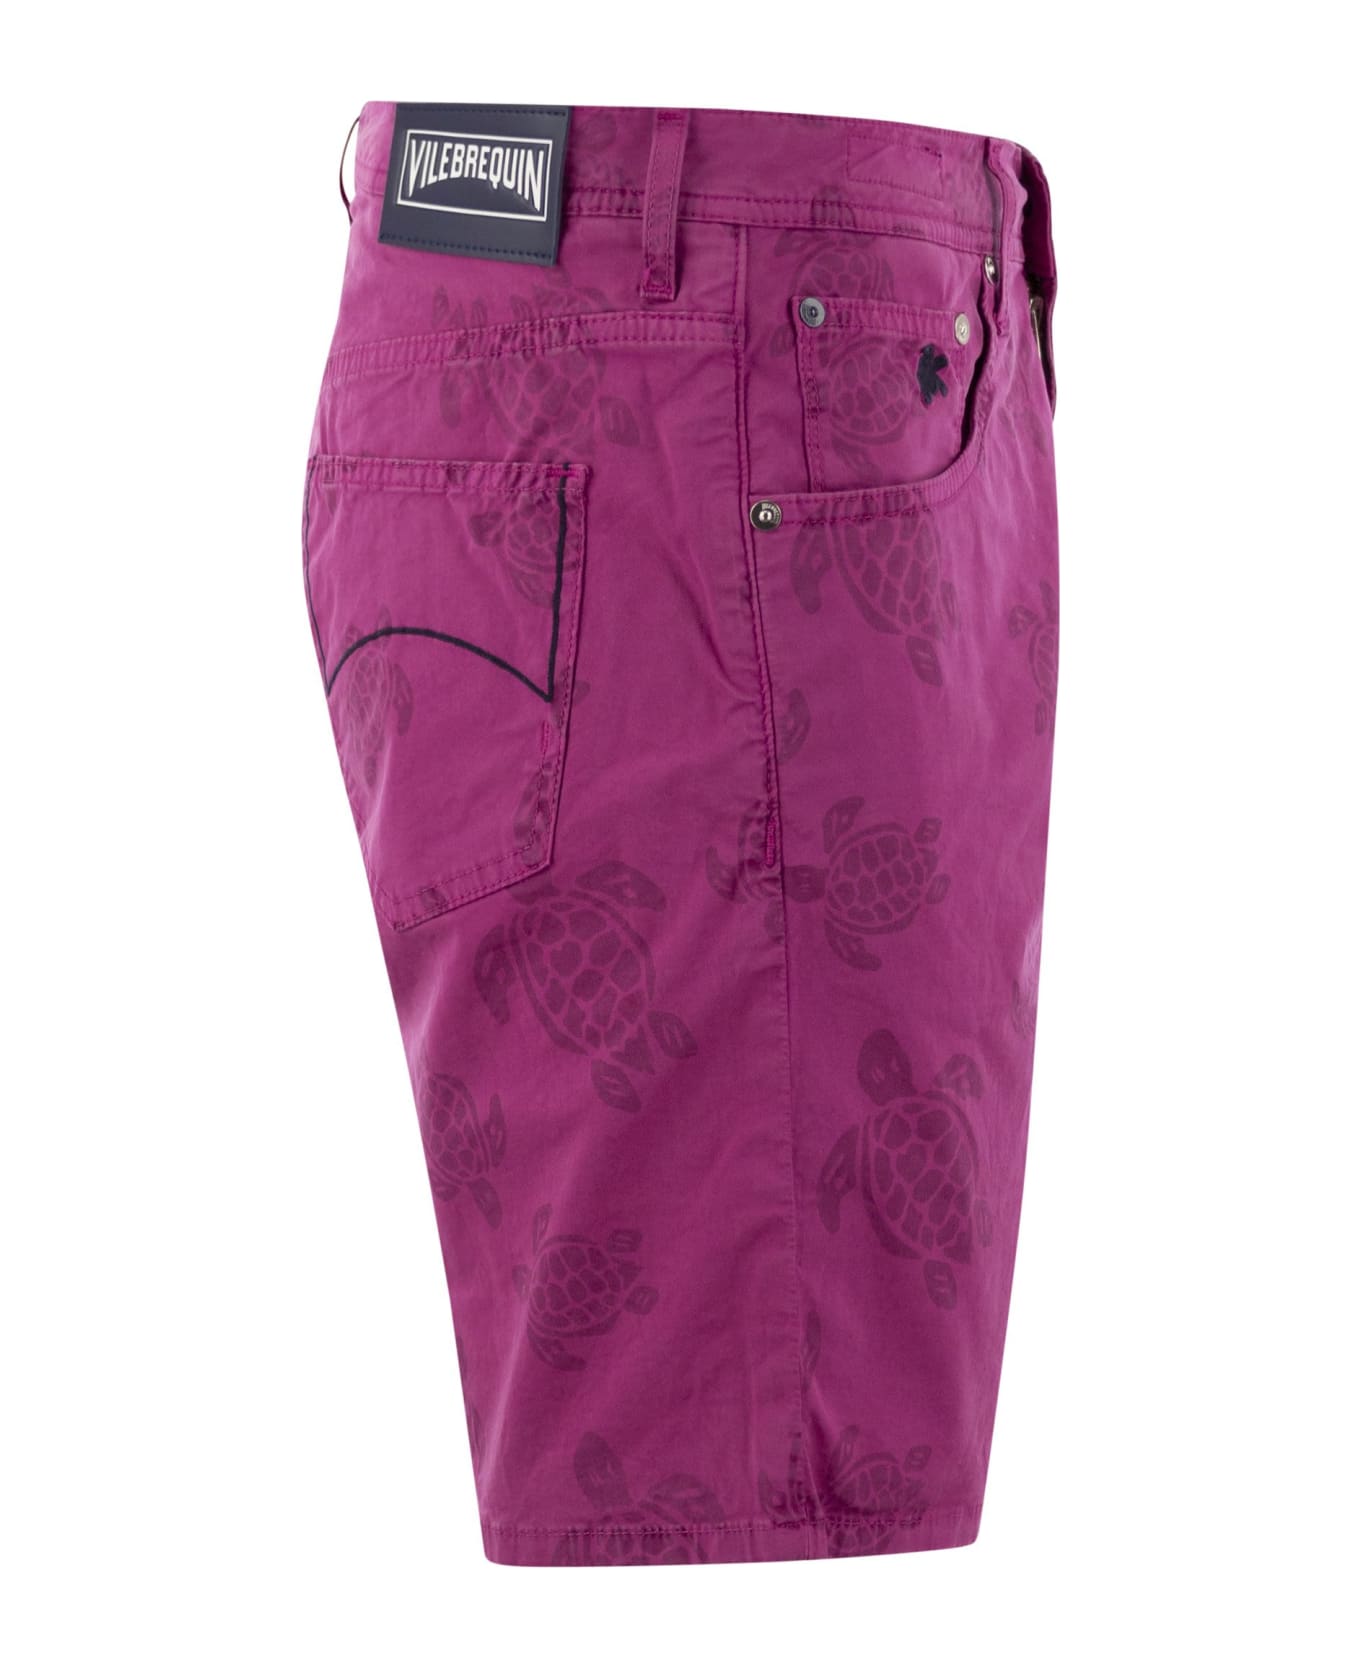 Vilebrequin Bermuda Shorts With Ronde Des Tortues Resin Print - Fuchsia